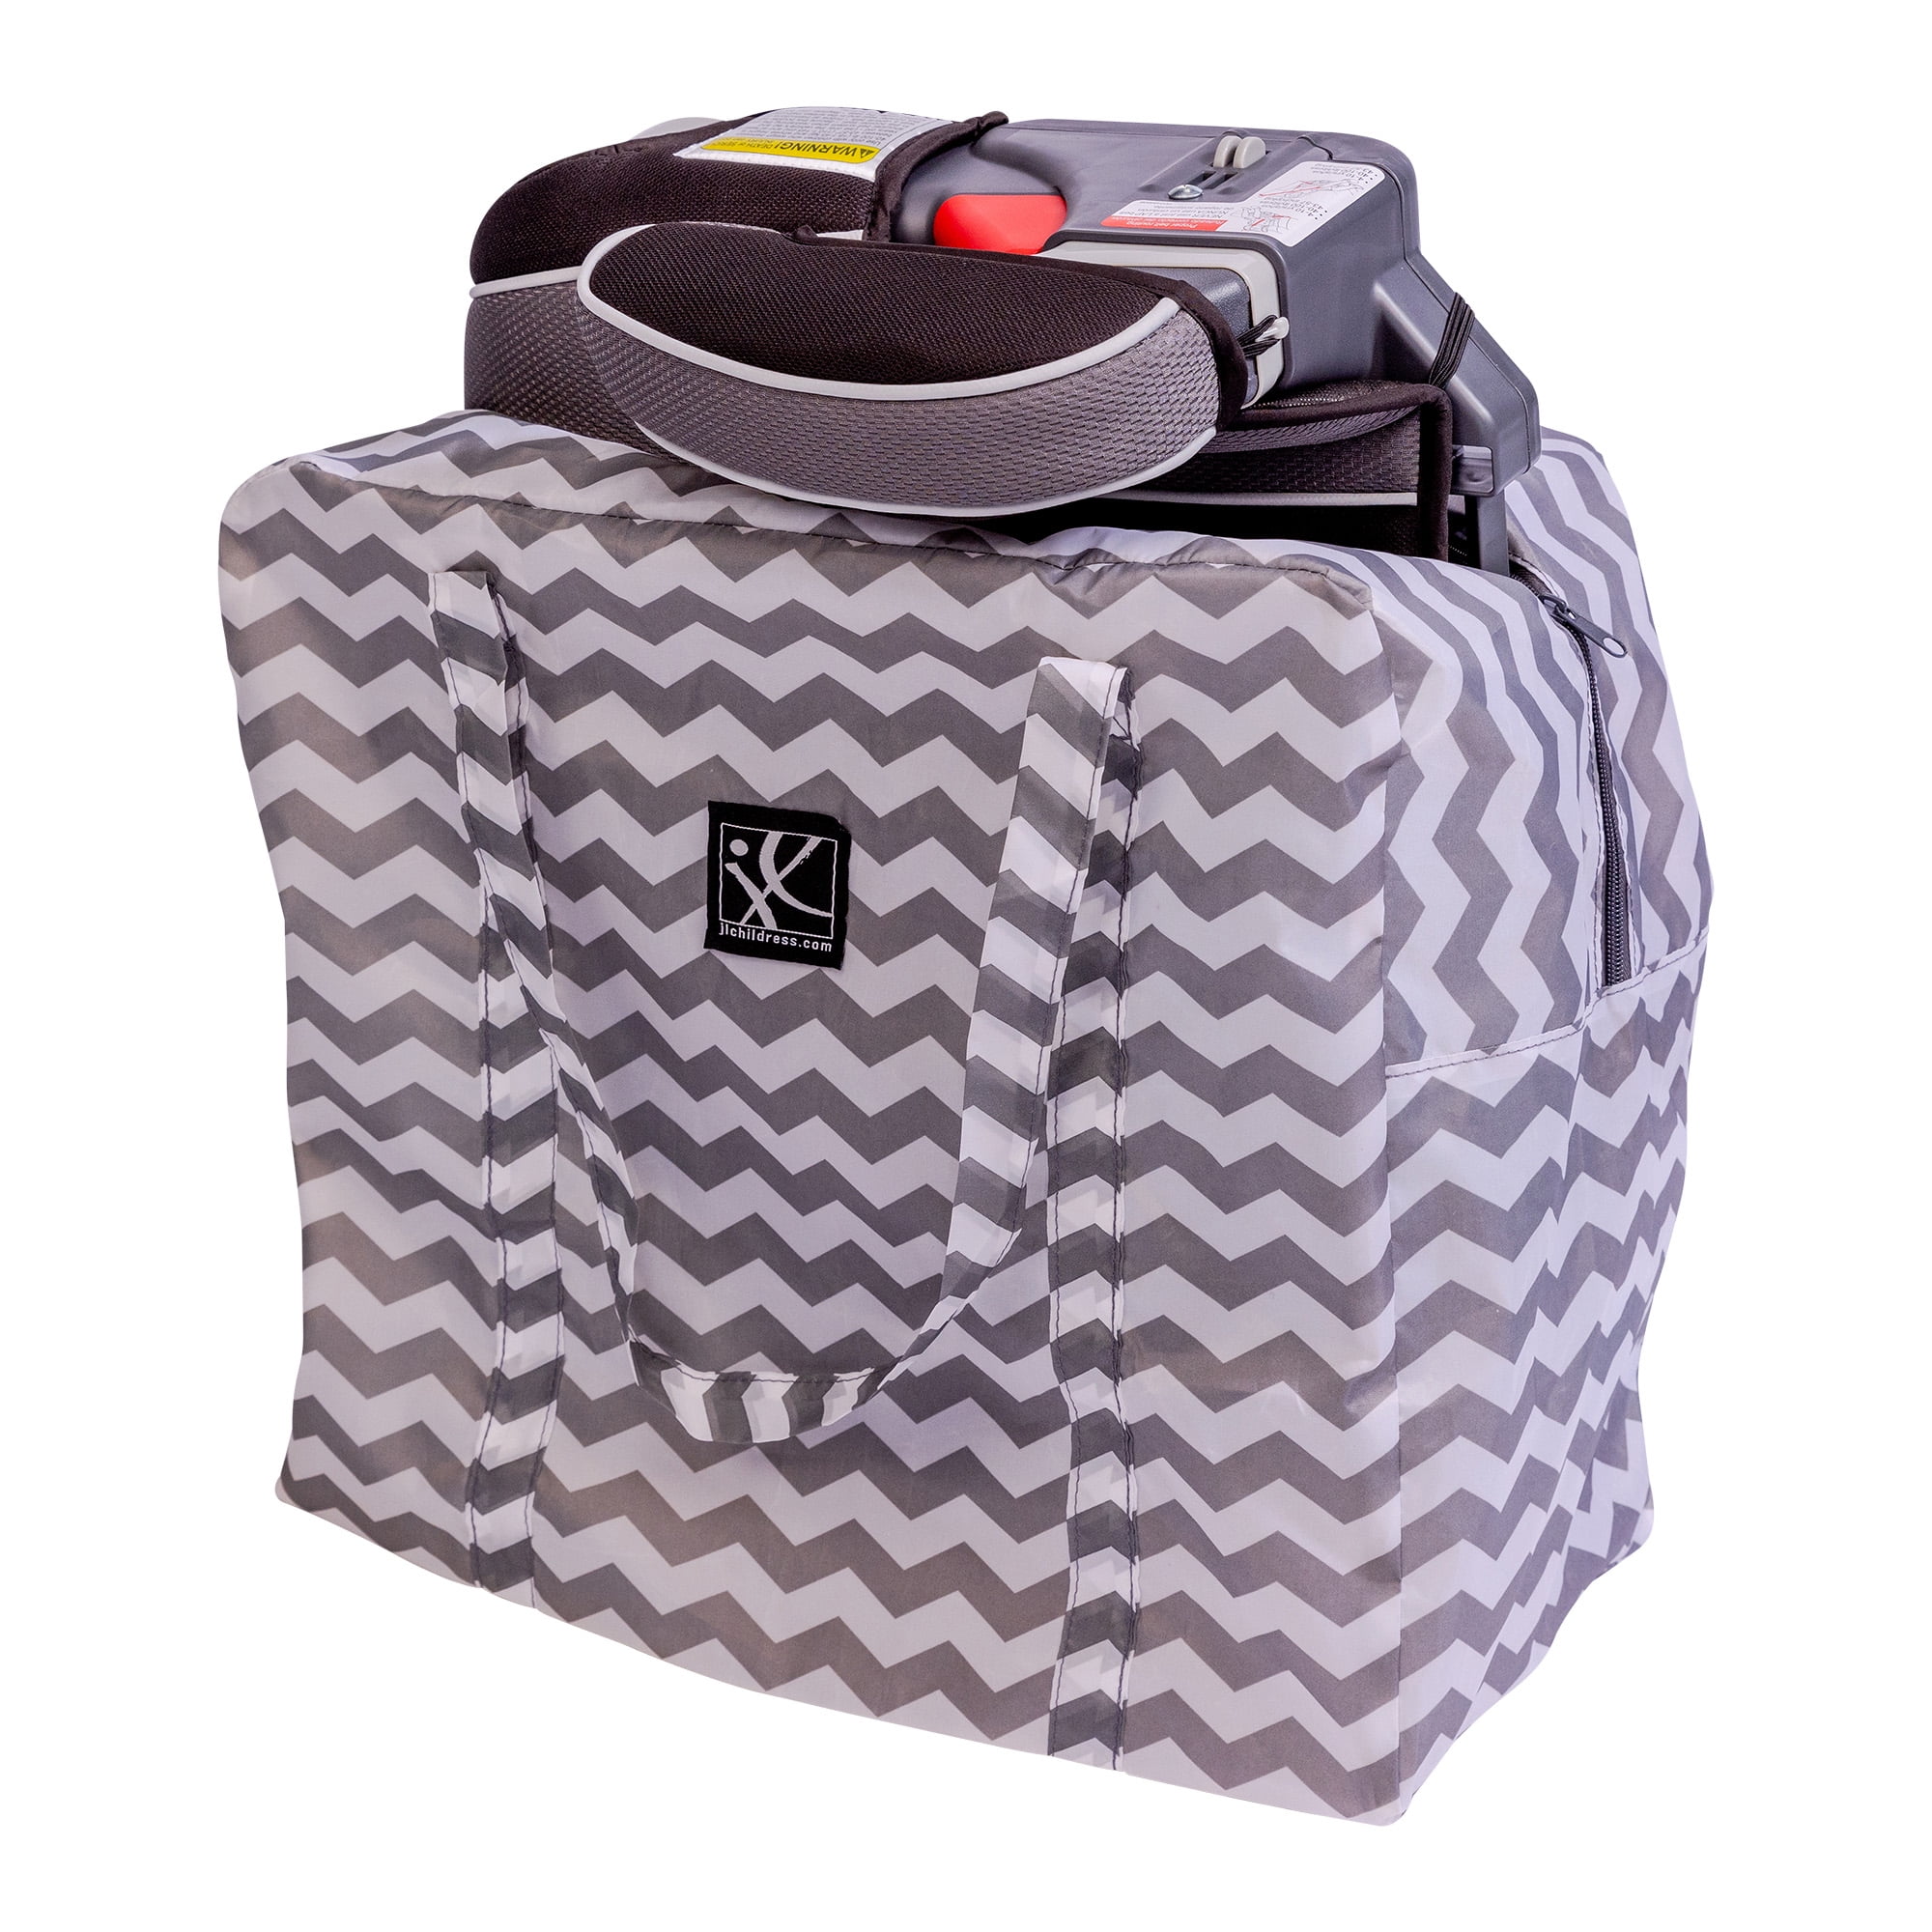 Childress Booster Go-Go Travel Bag for Backless Booster Seats and Baby  Seats, Grey Chevron